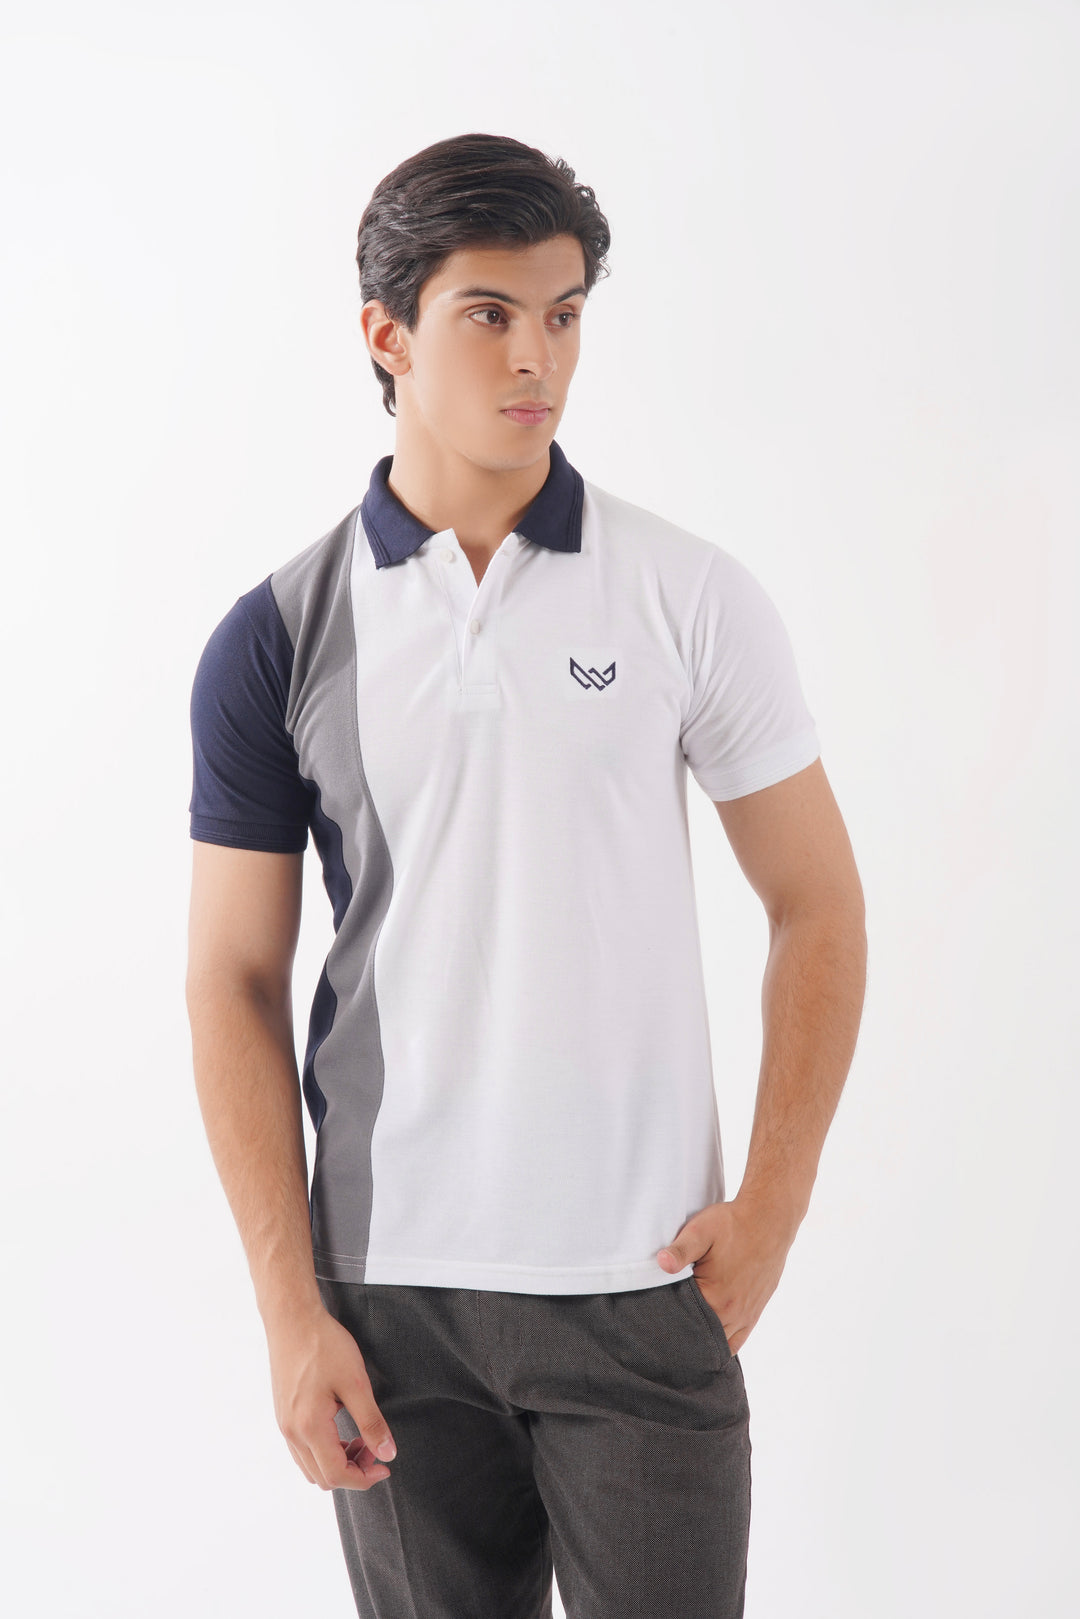 Deluxe White Chic Polo